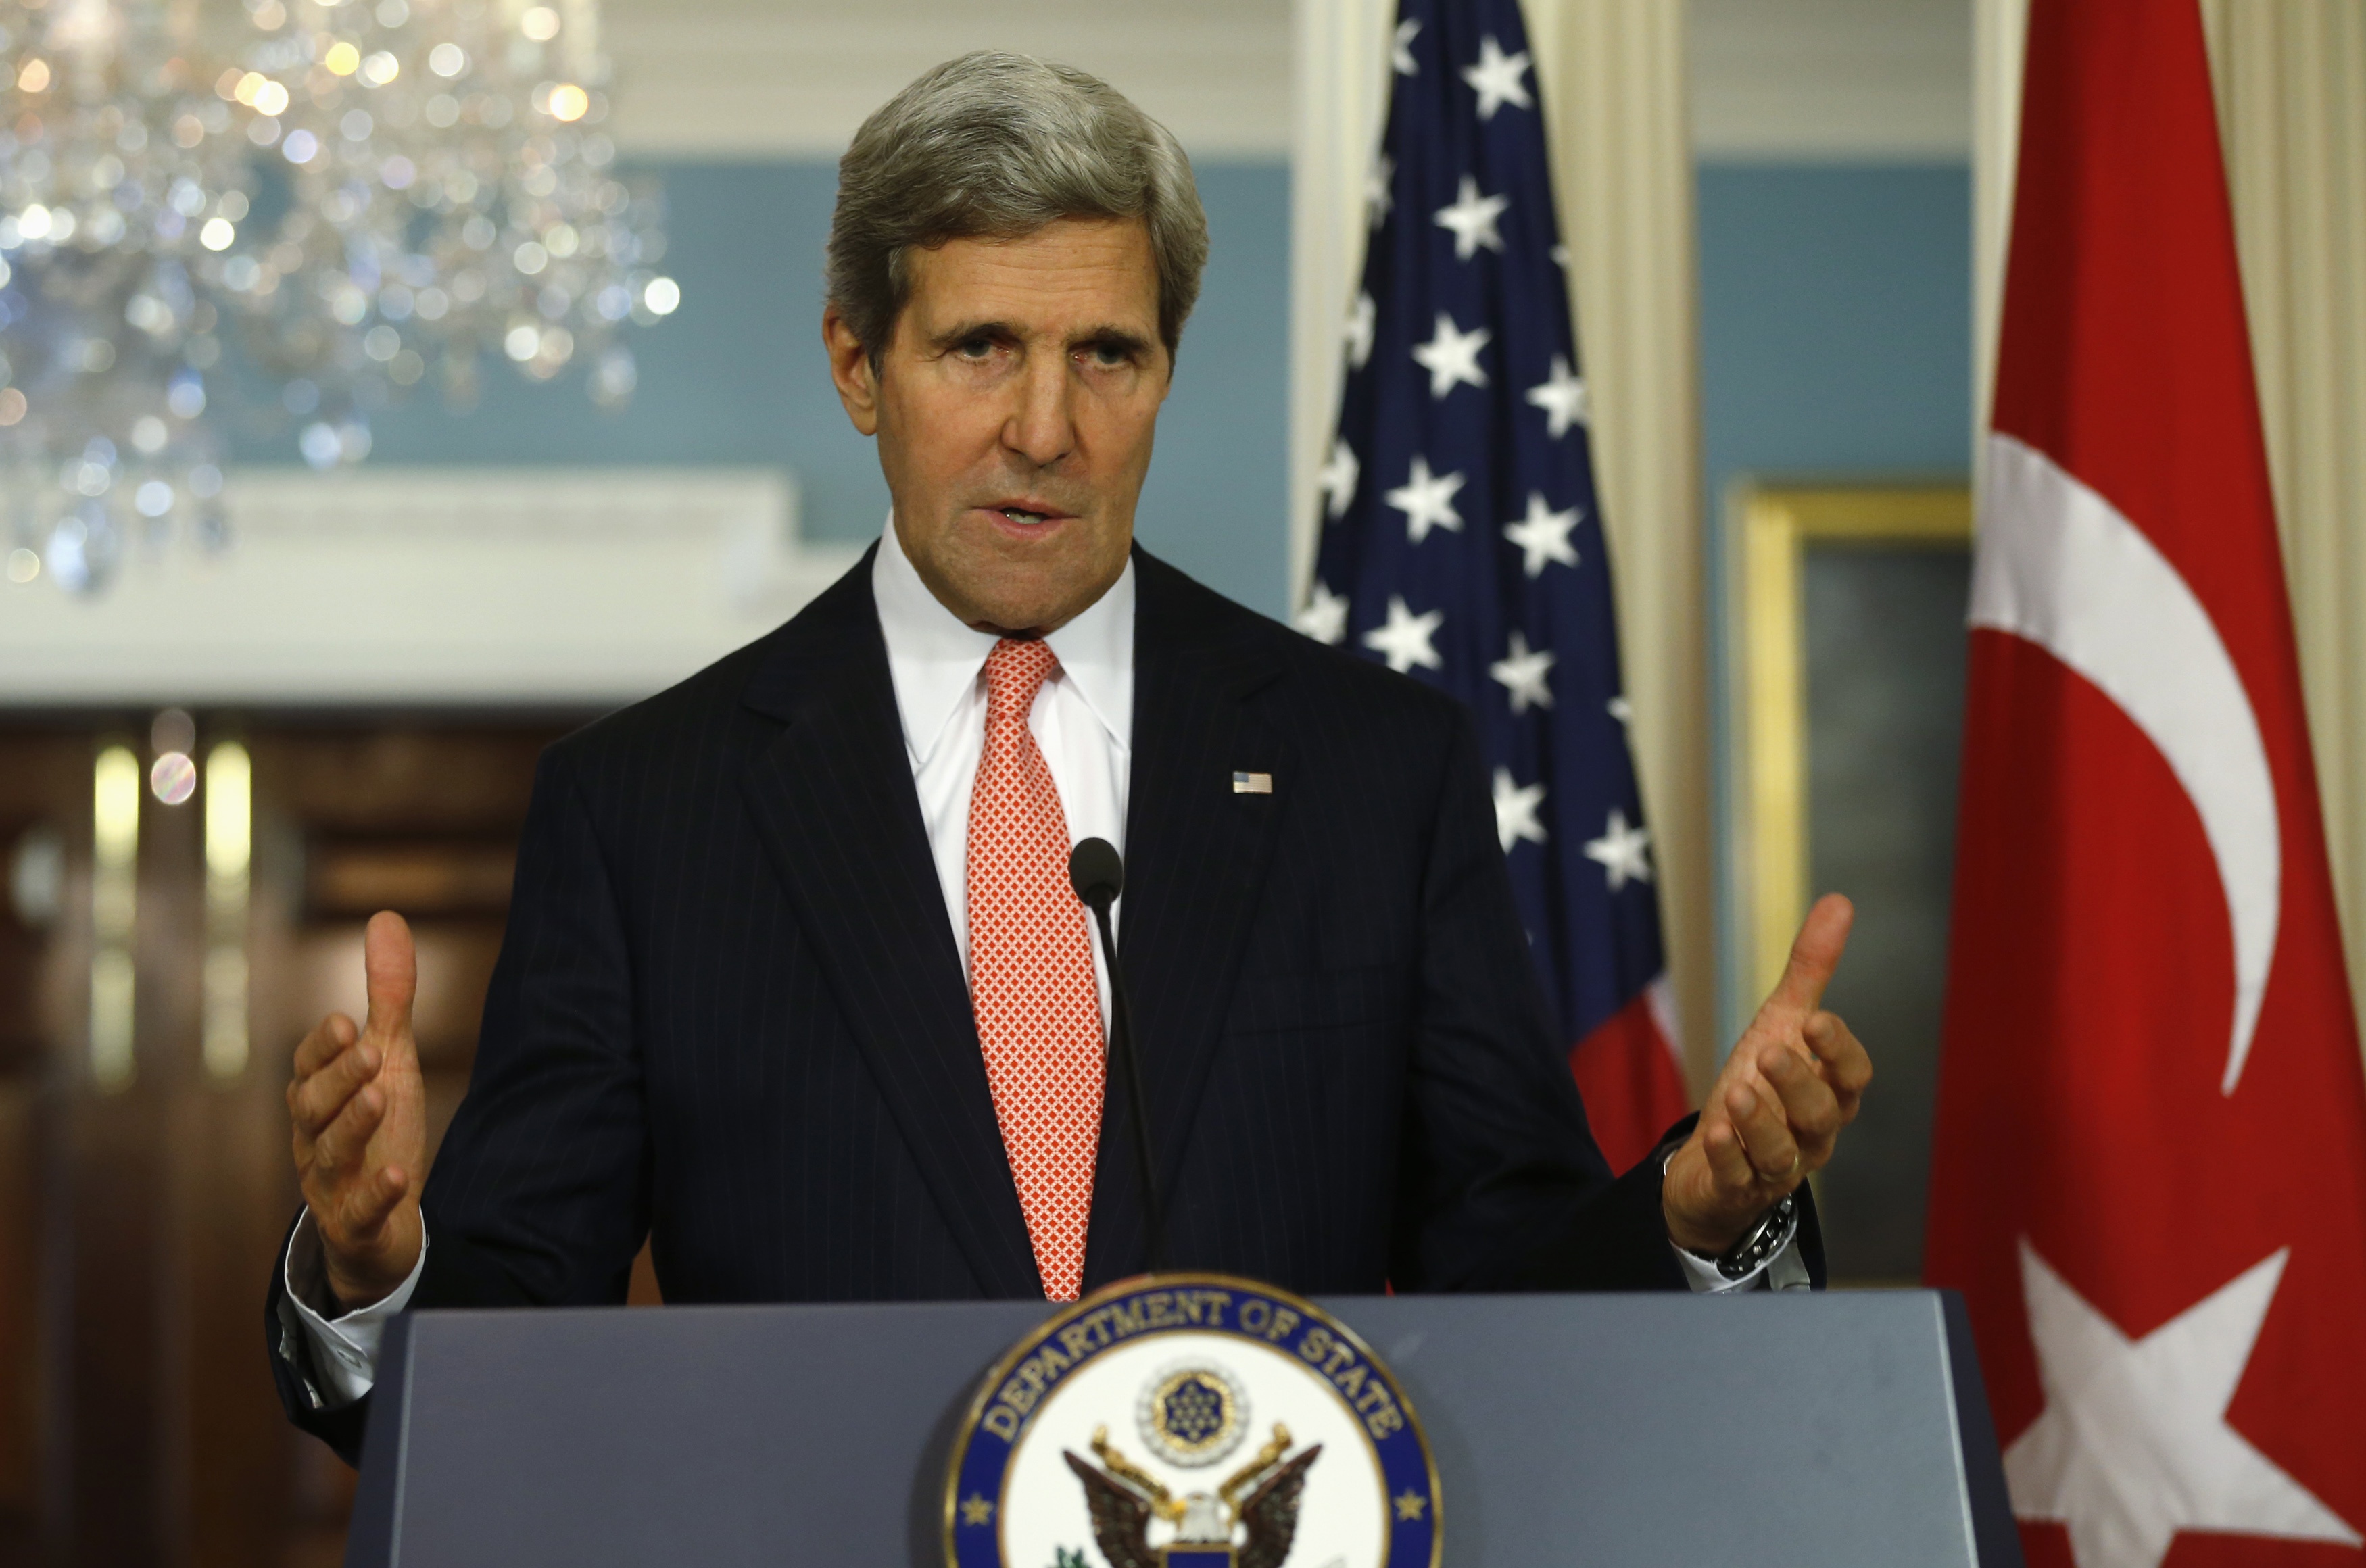 Kerry presses Iran to prove its nuclear program peaceful